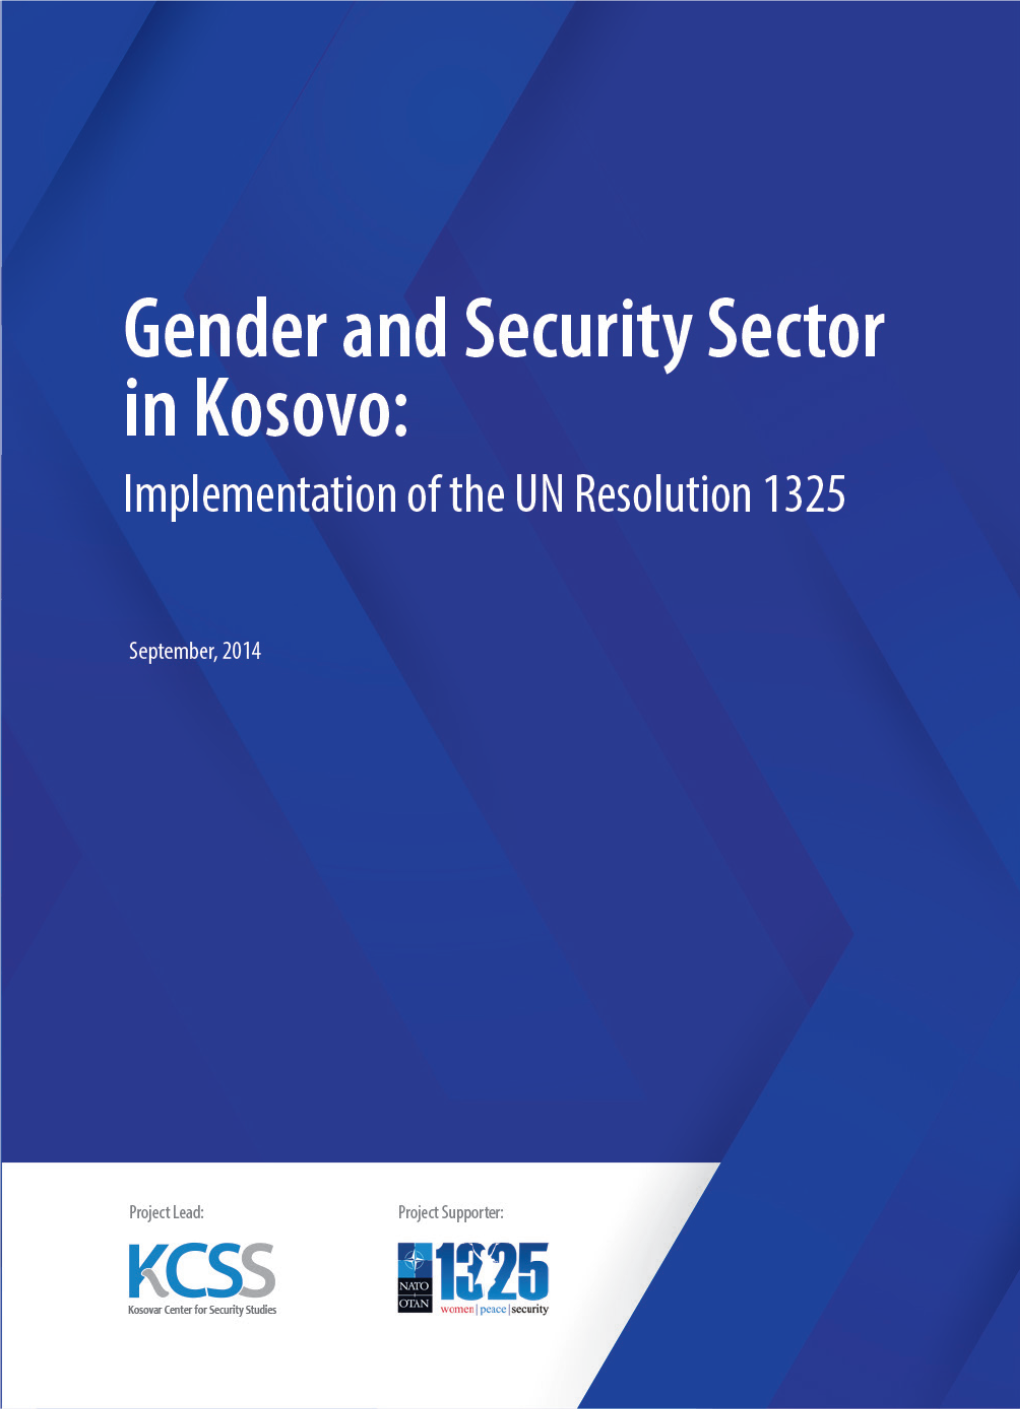 Gender and Security Sector in Kosovo: Implementation of the UN Resolution 1325